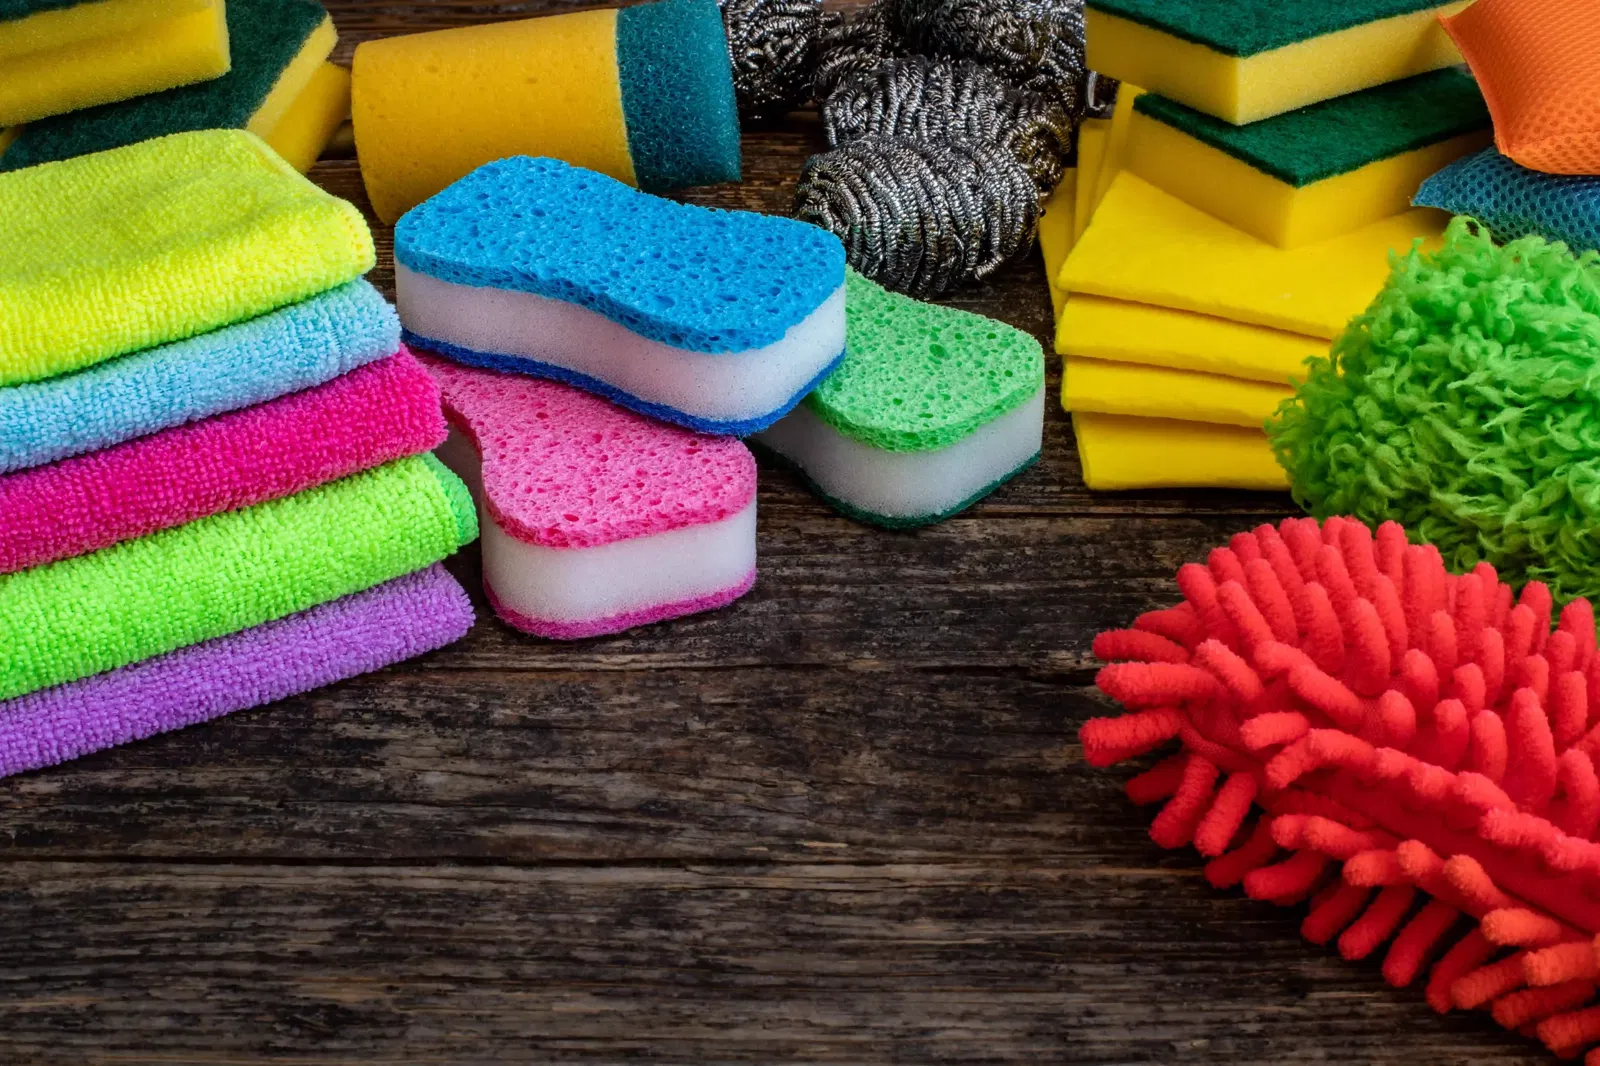 Fantastic Sponges to Use for Cleaning in Dubai